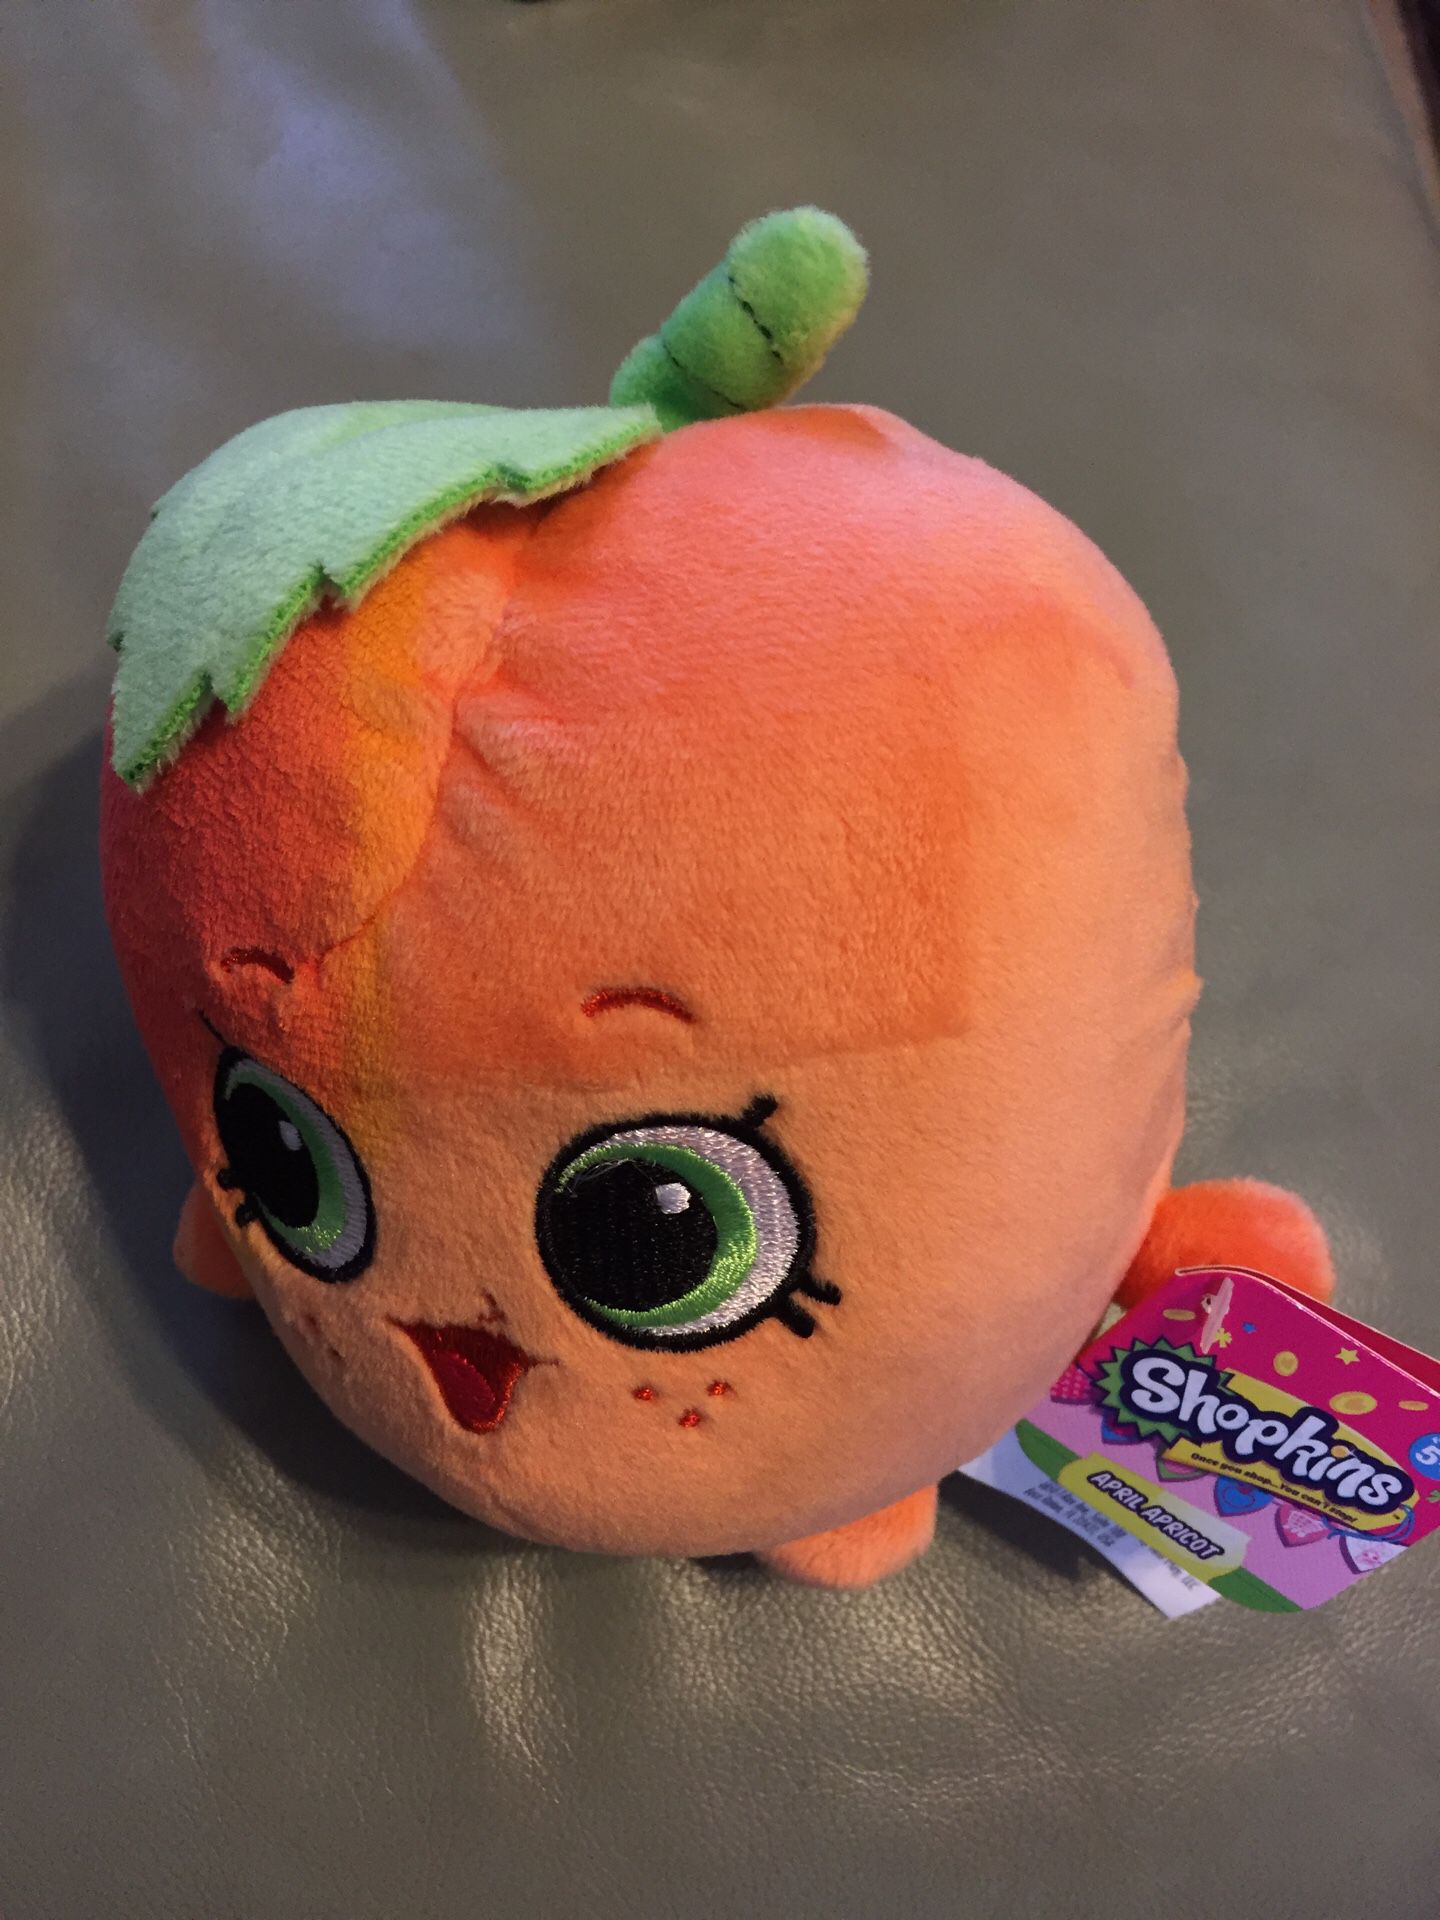 Shopkins April Apricot Plush Brand New For Sale In Myrtle Beach Sc Offerup